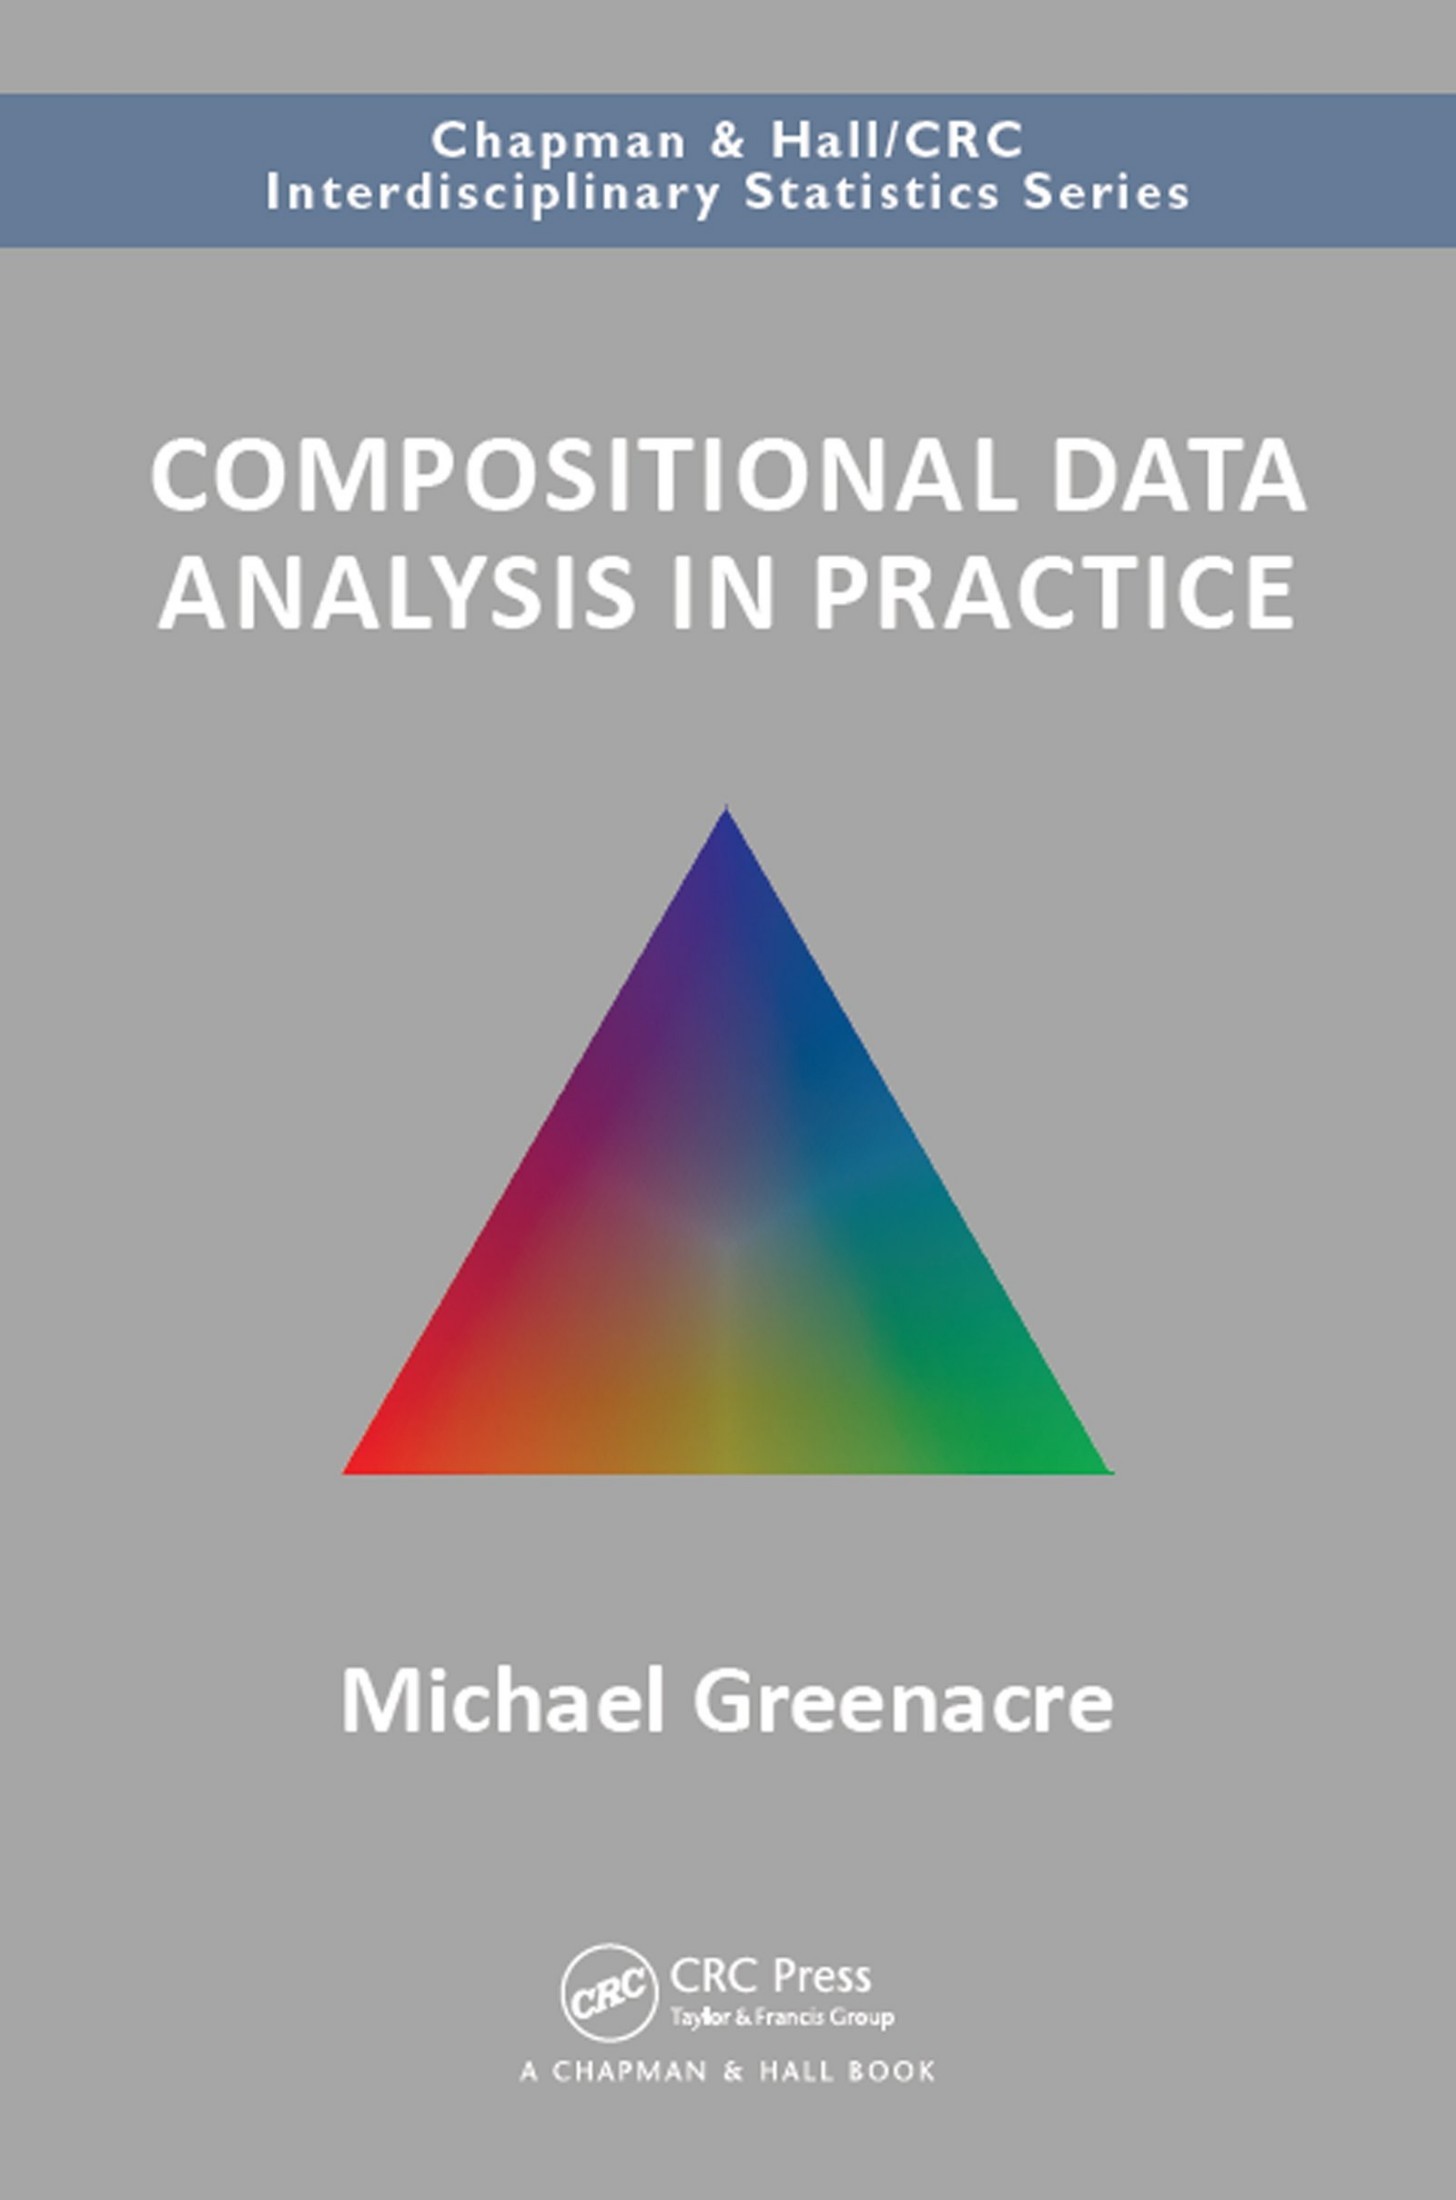 Compositional Data Analysis: Theory and Applications